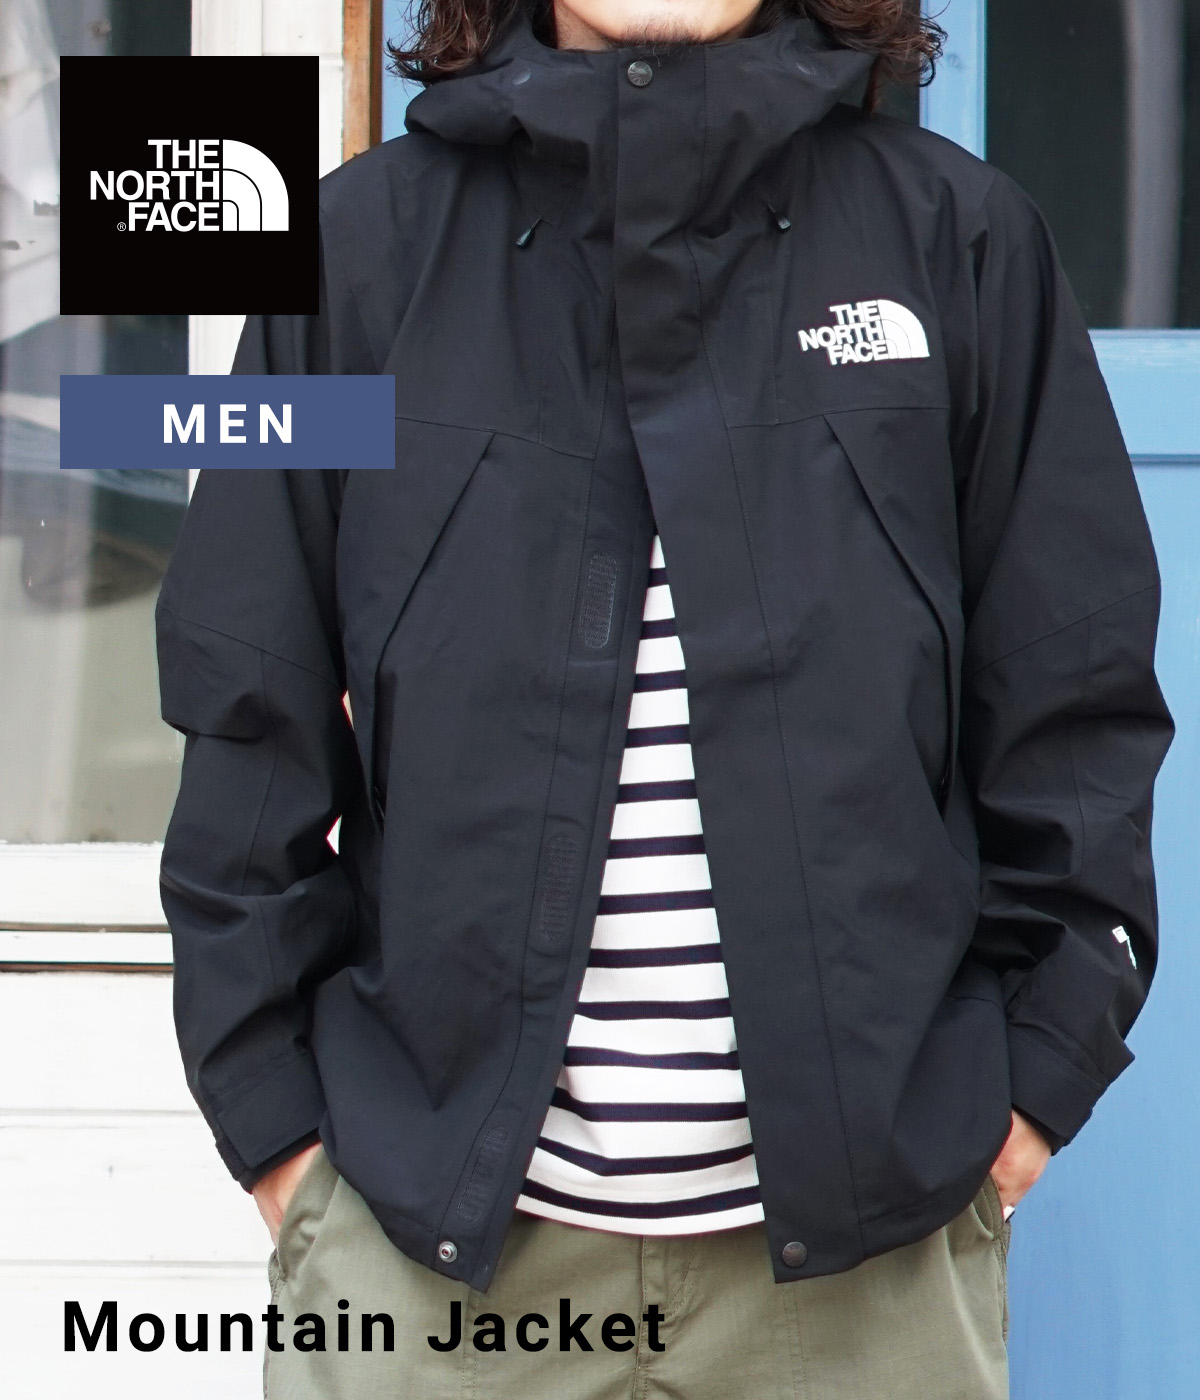 THE NORTH FACE / ザ ノースフェイス ： Mountain Jacket